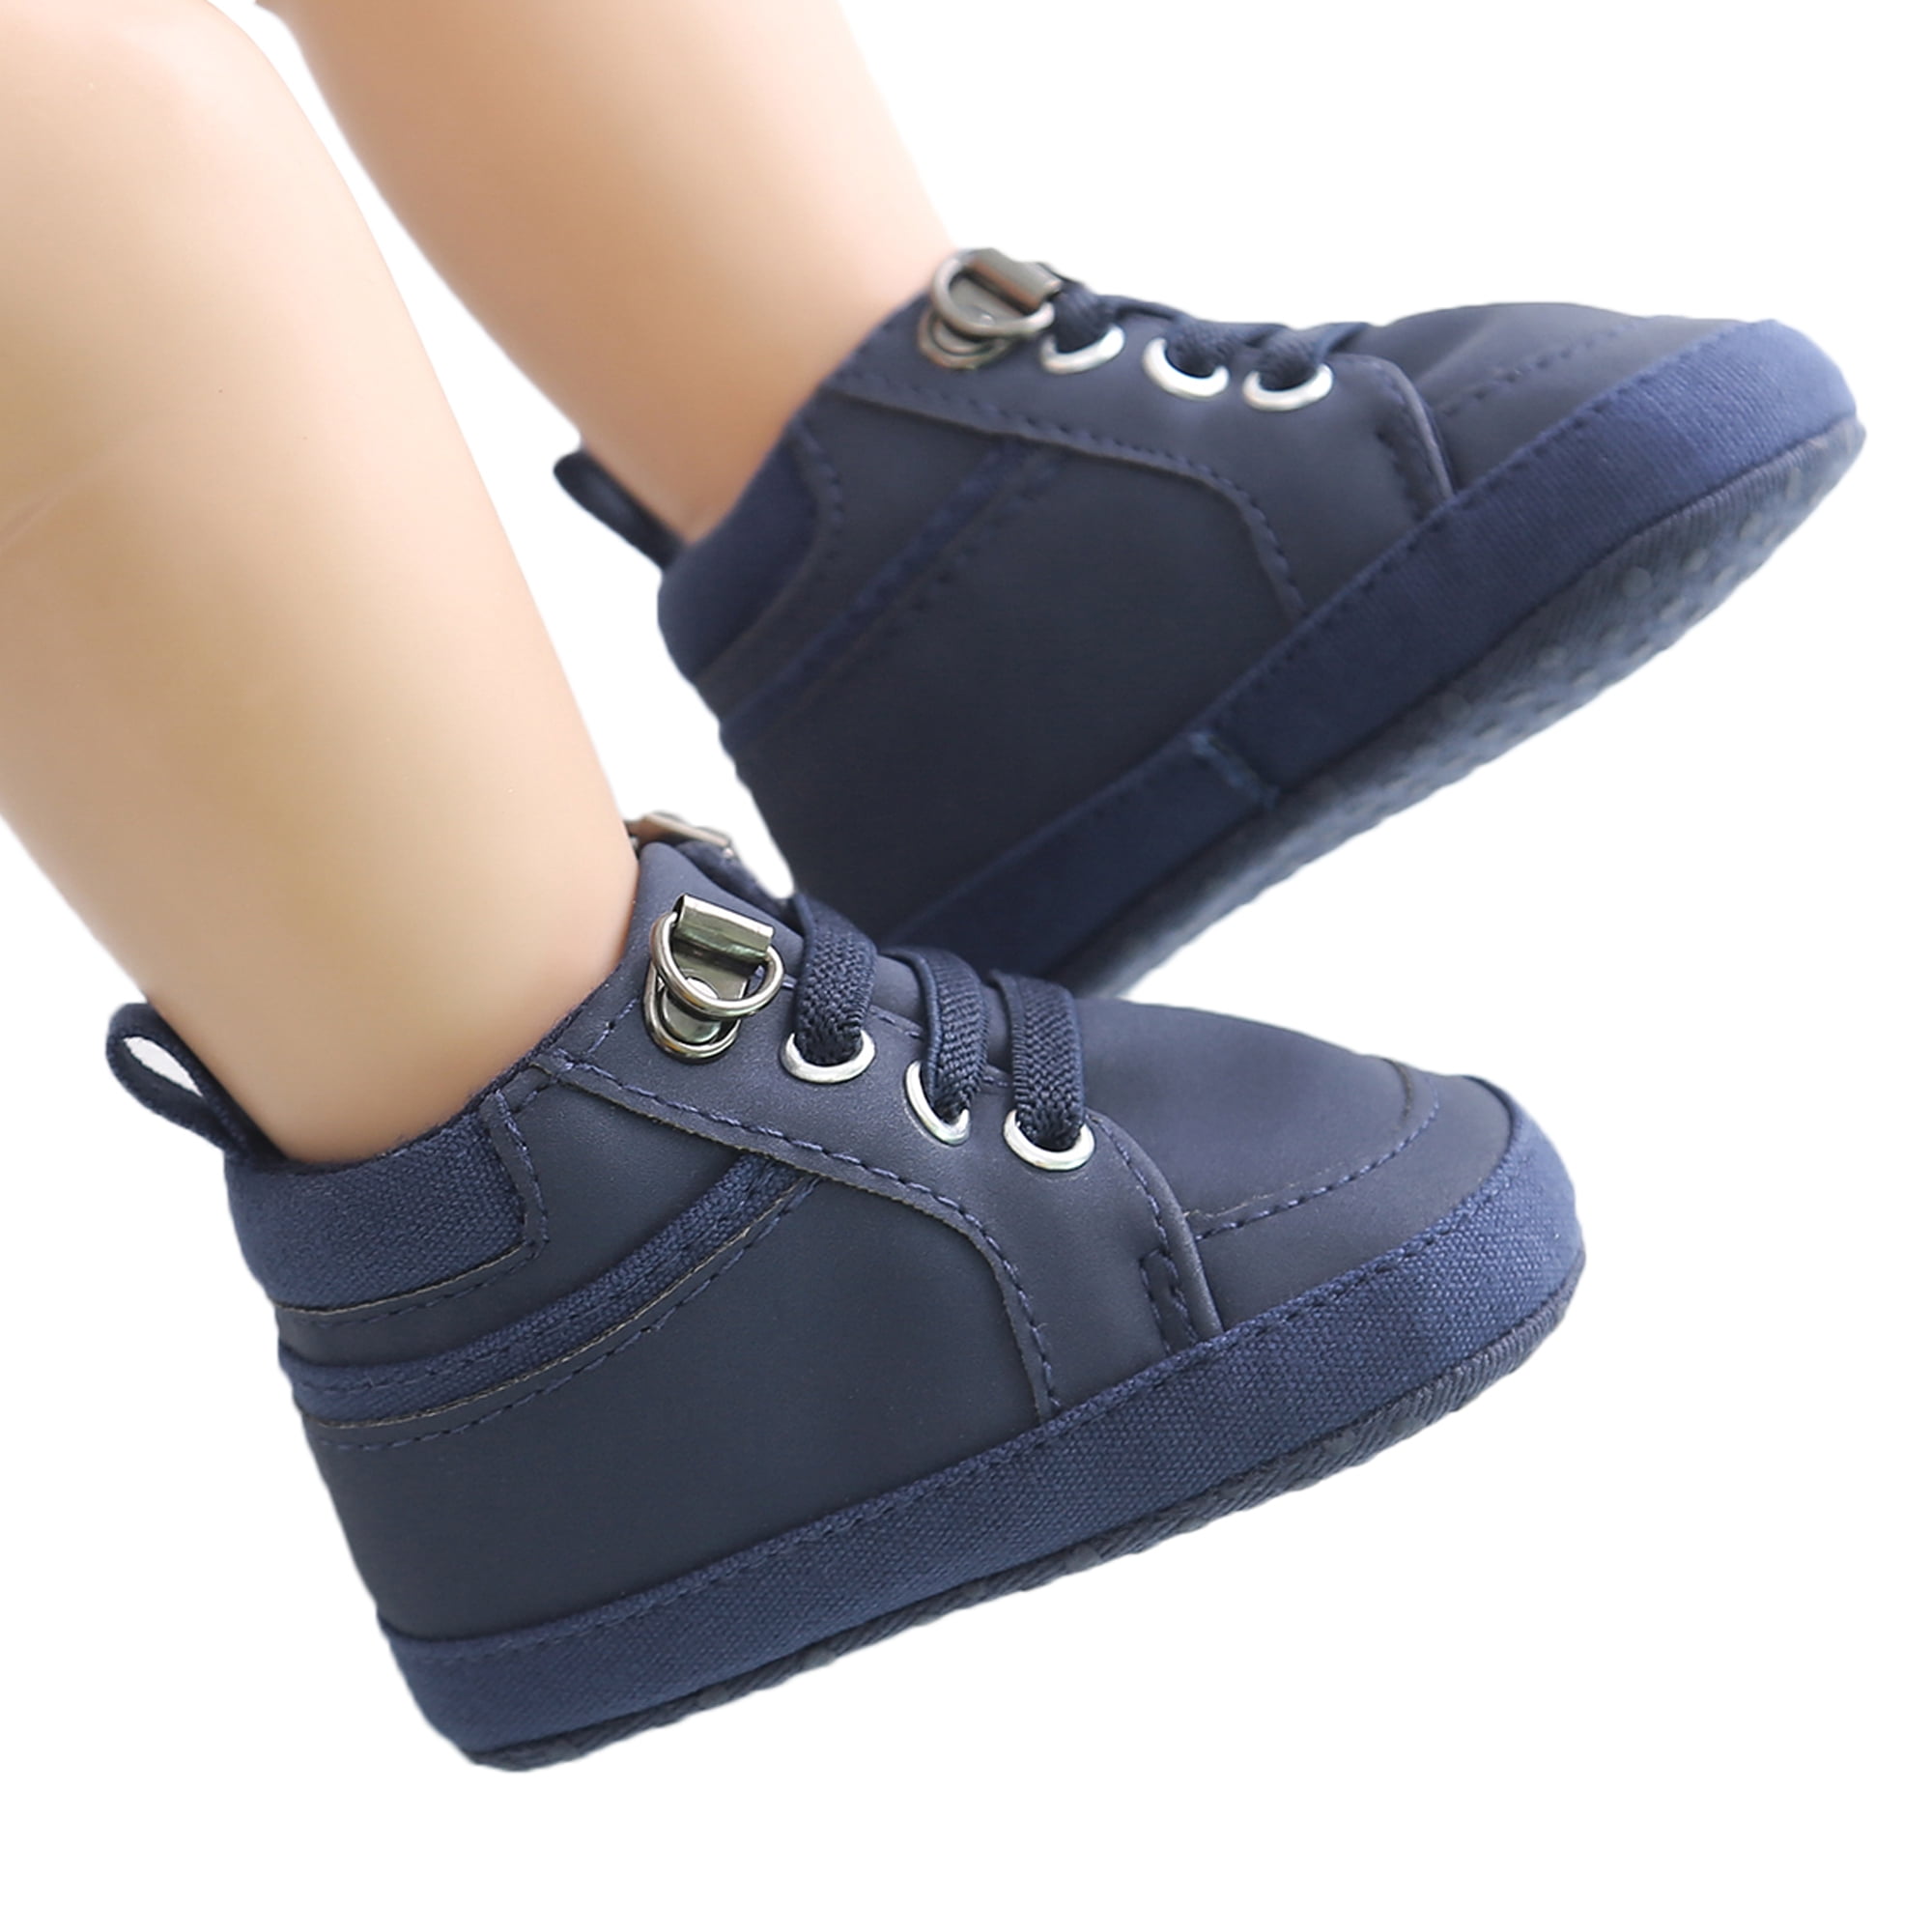 Boys Girls Kids Fashion Short Boots Casual Shoes for 4-12 Years Old Teen Solid Ankle Sport Shoes Boots 